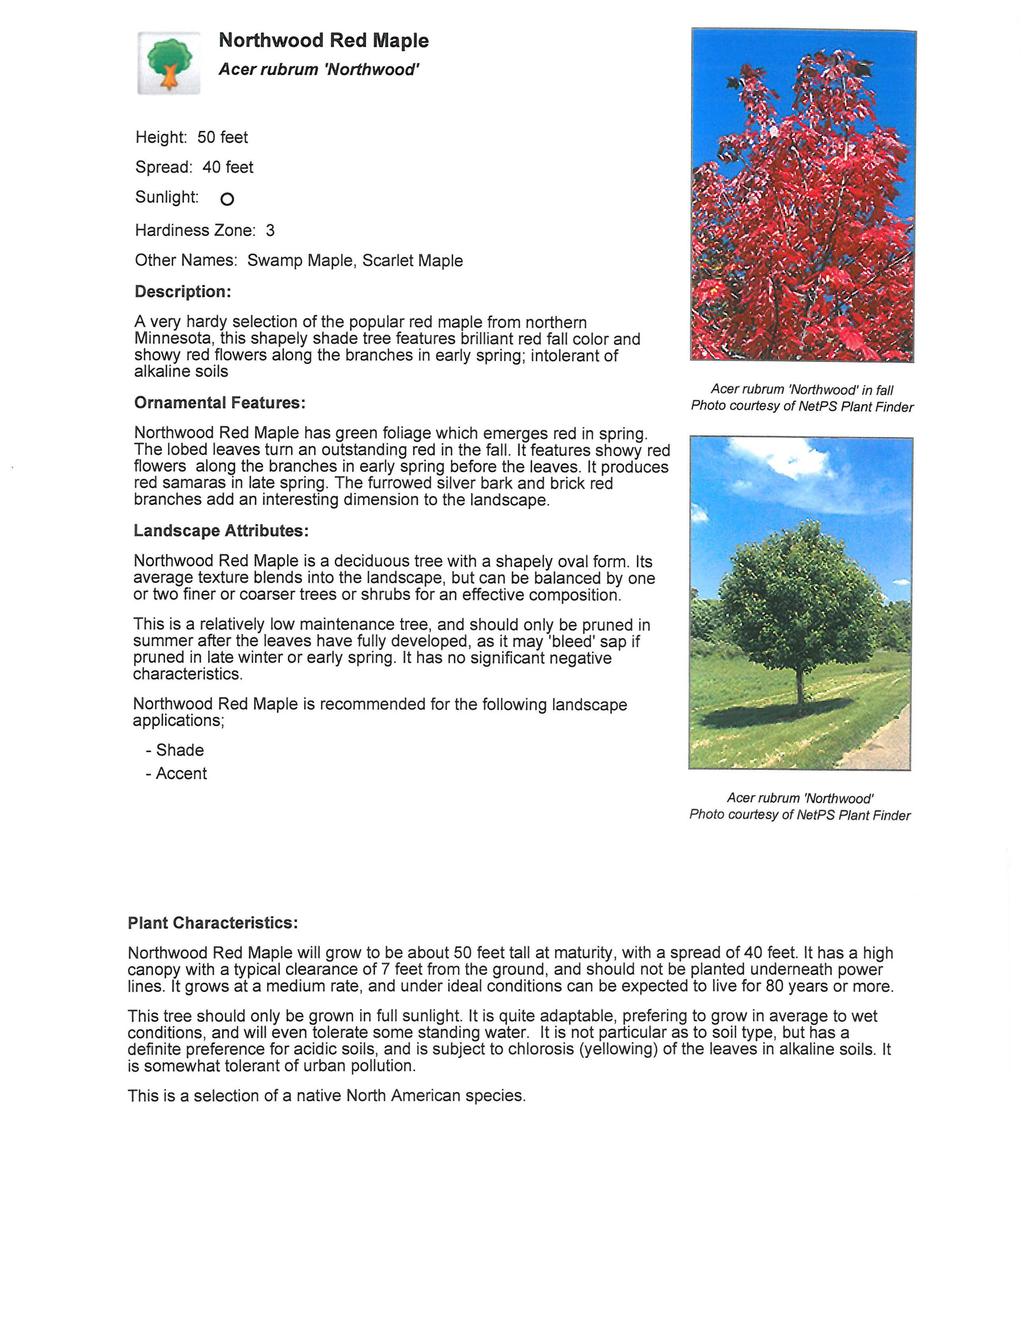 Northwood Red Maple Acer rubrum 'Northwood' Height: 50 feet Spread: 40 feet Sunlight: 0 Hardiness Zone: 3 Other Names: Swamp Maple, Scarlet Maple A very hardy selection of the popular red maple from